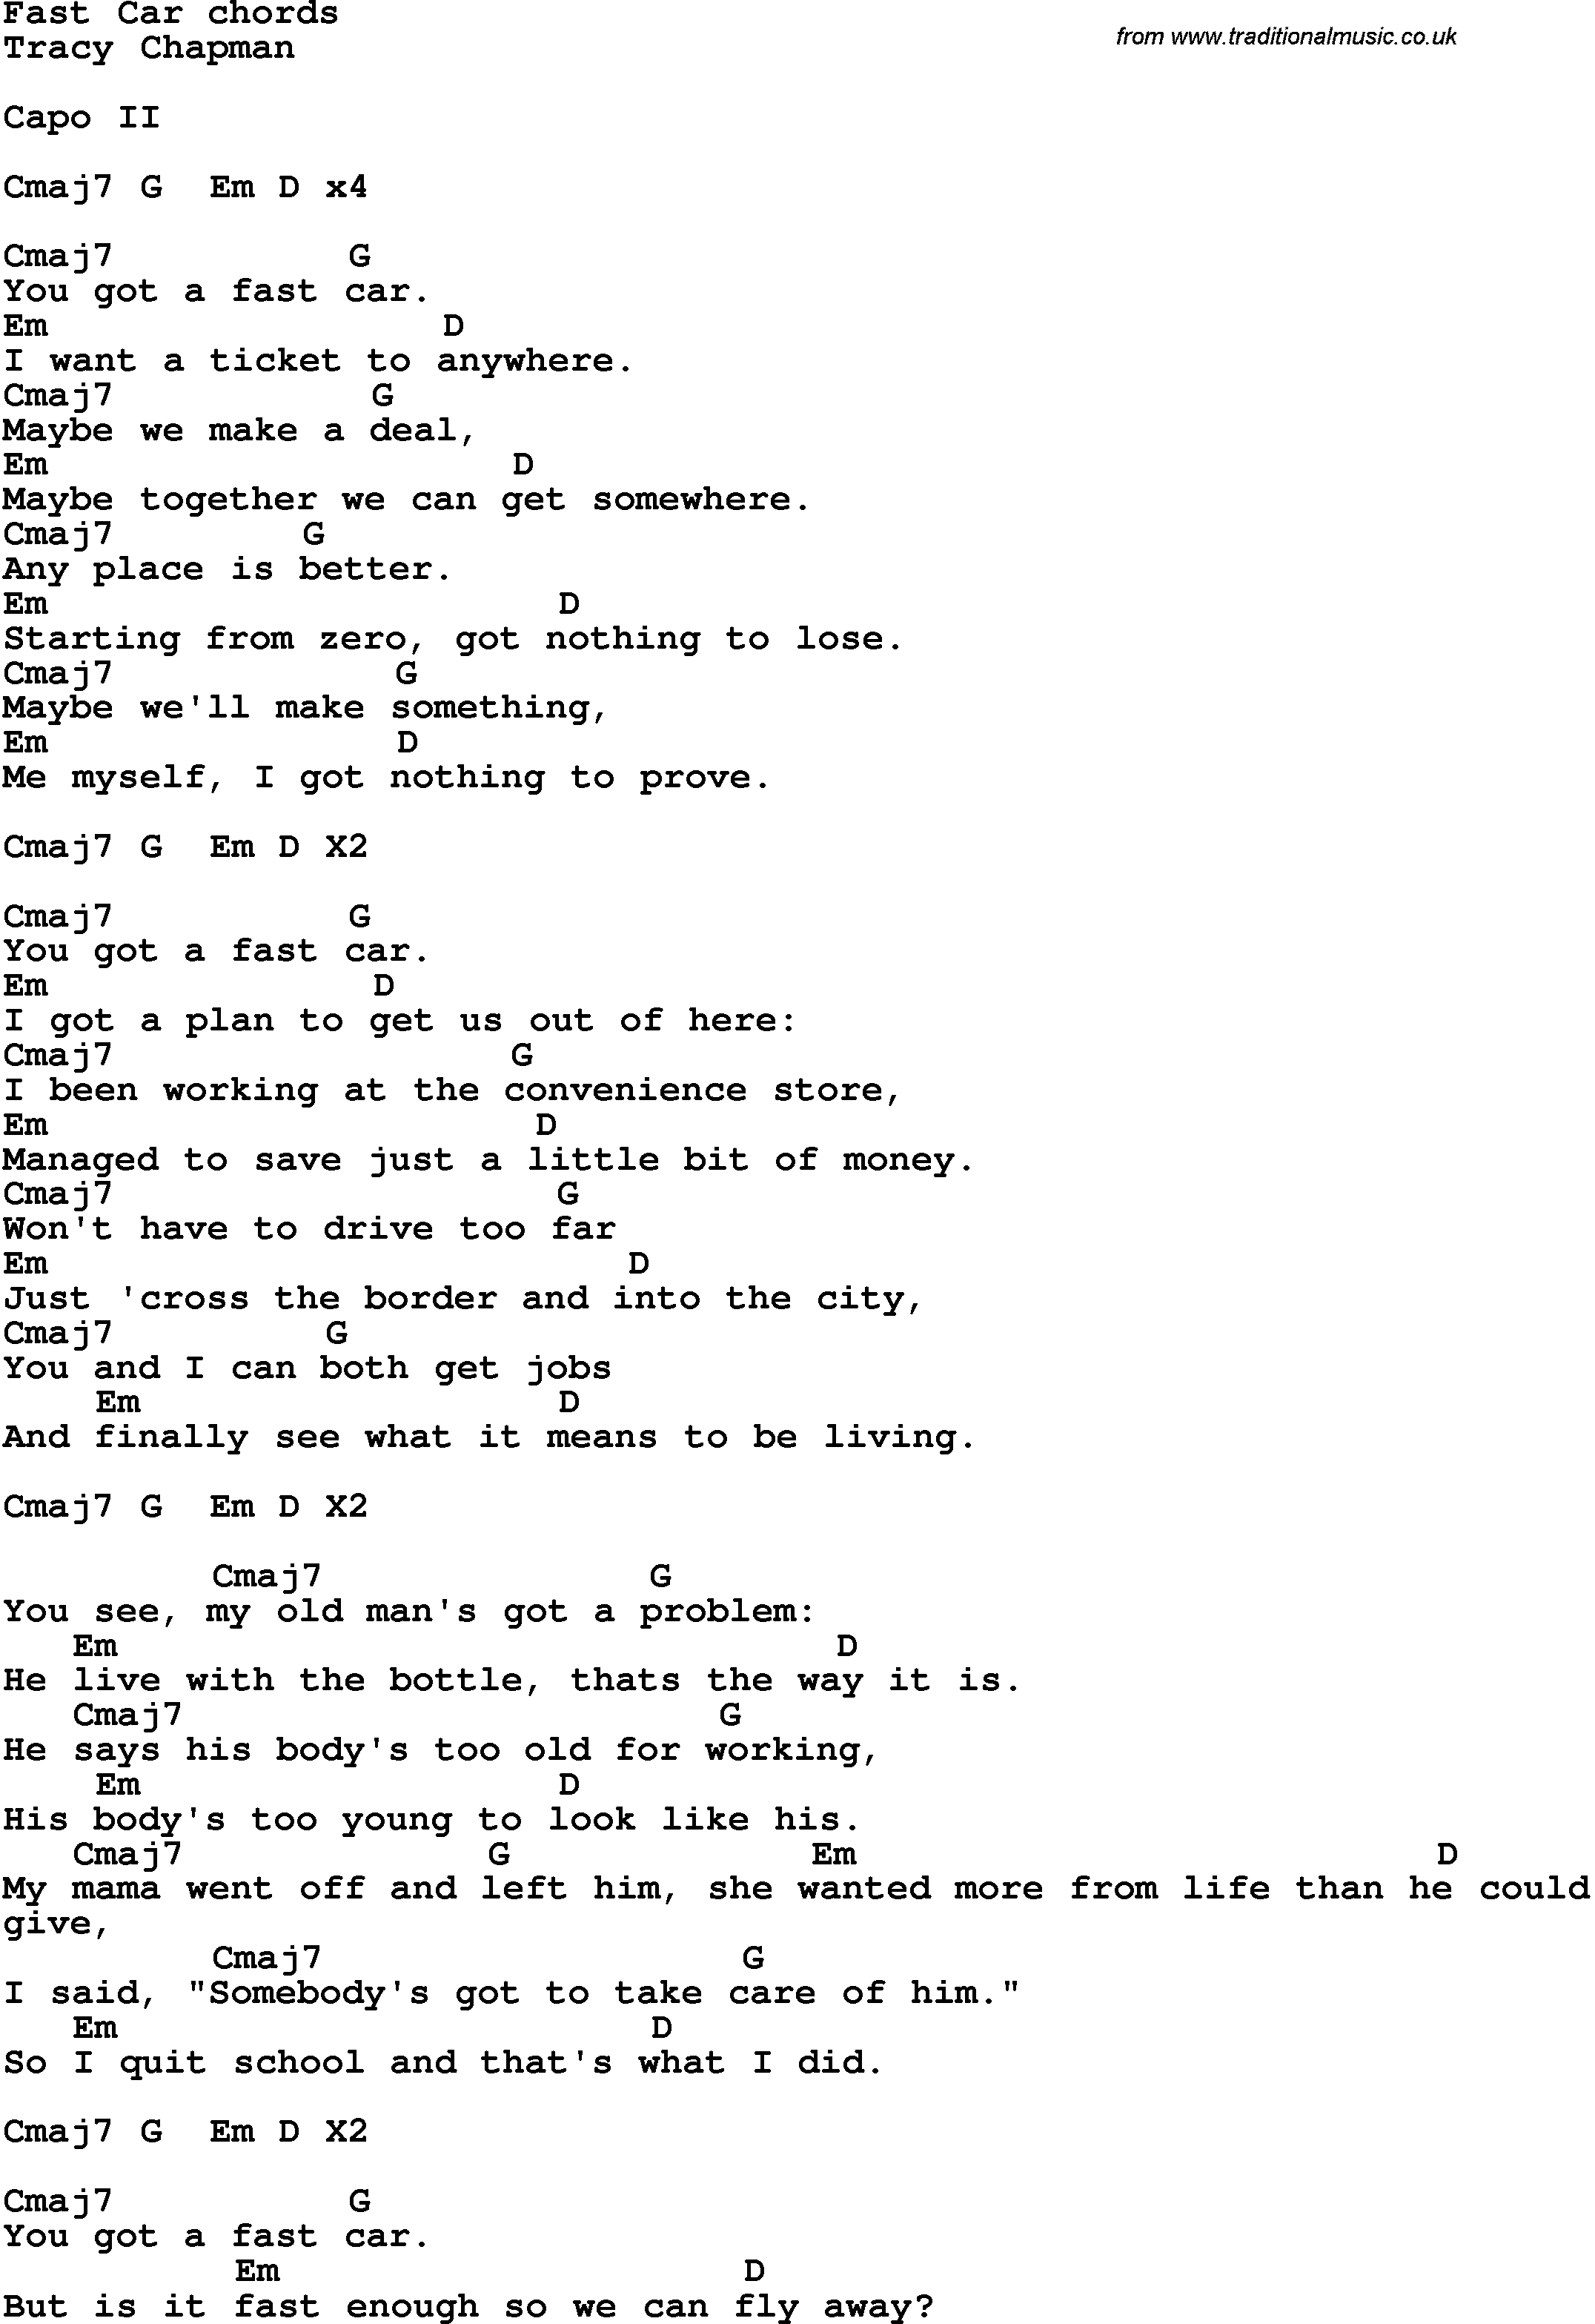 Fast Car Chords Song Lyrics With Guitar Chords For Fast Car